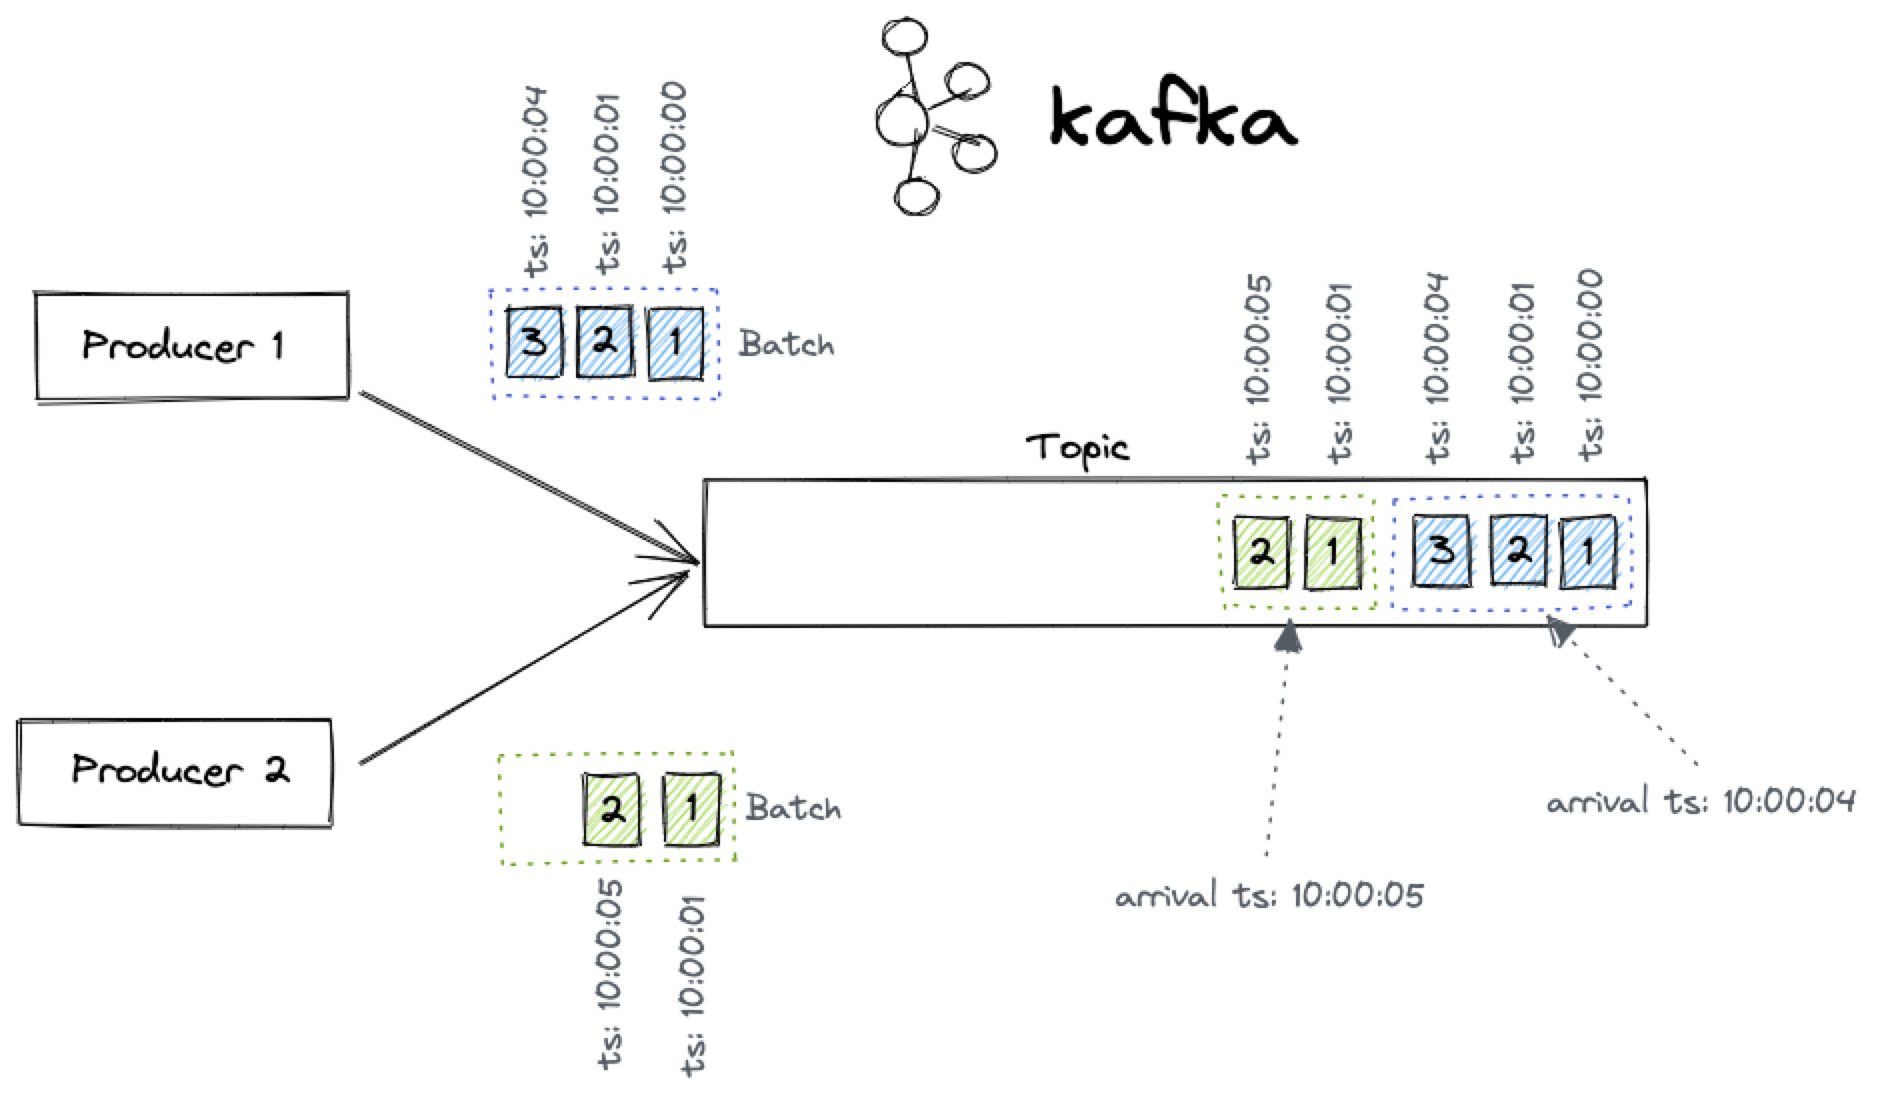 Two Kafka producers batching the messages, the resulting ordering is dependant on the batch ingestion time